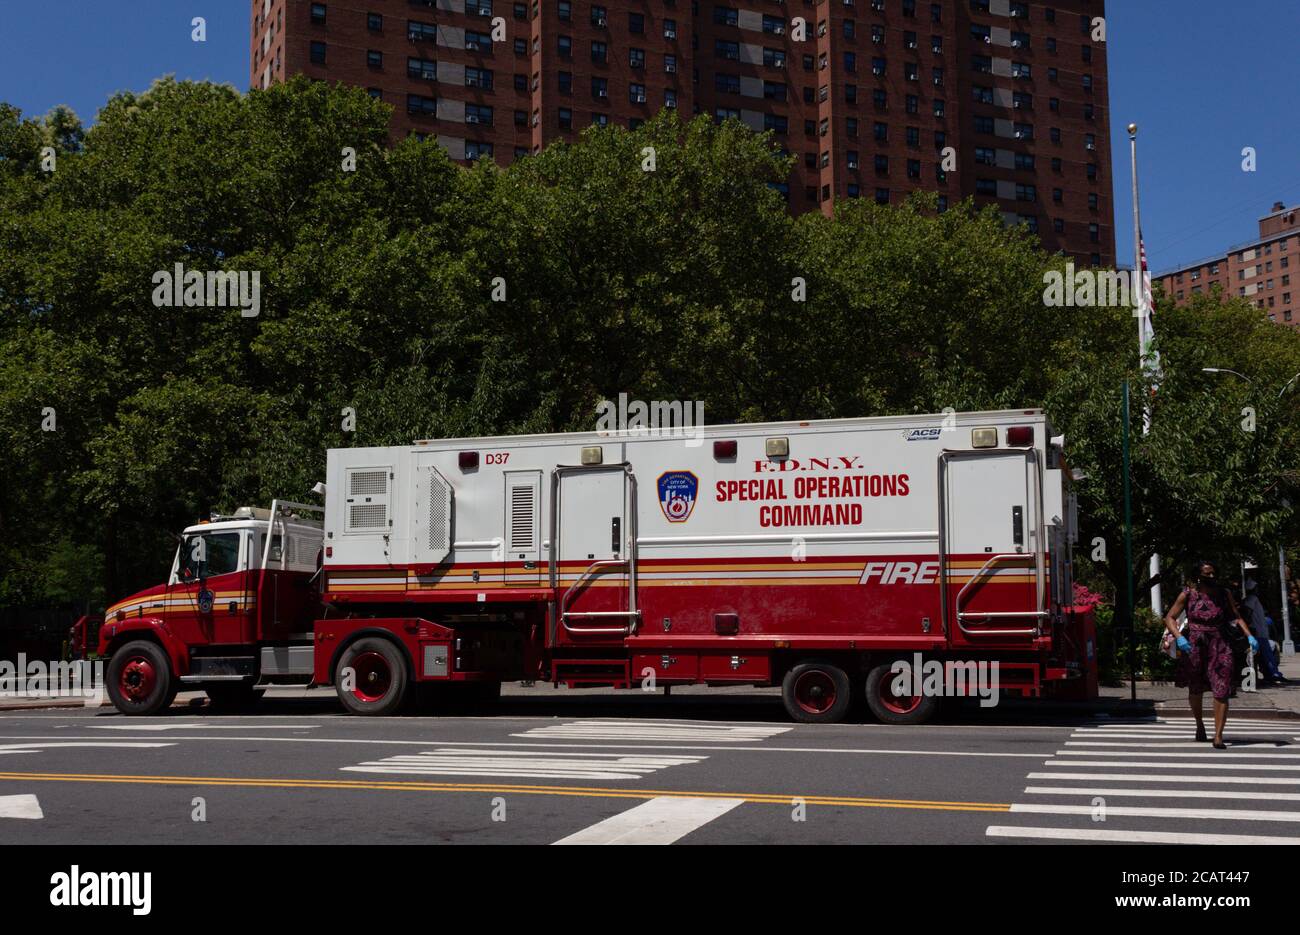 a Special Operations Command truck from the Fire Department of New York, or FDNY, parked on a street in Harlem Stock Photo